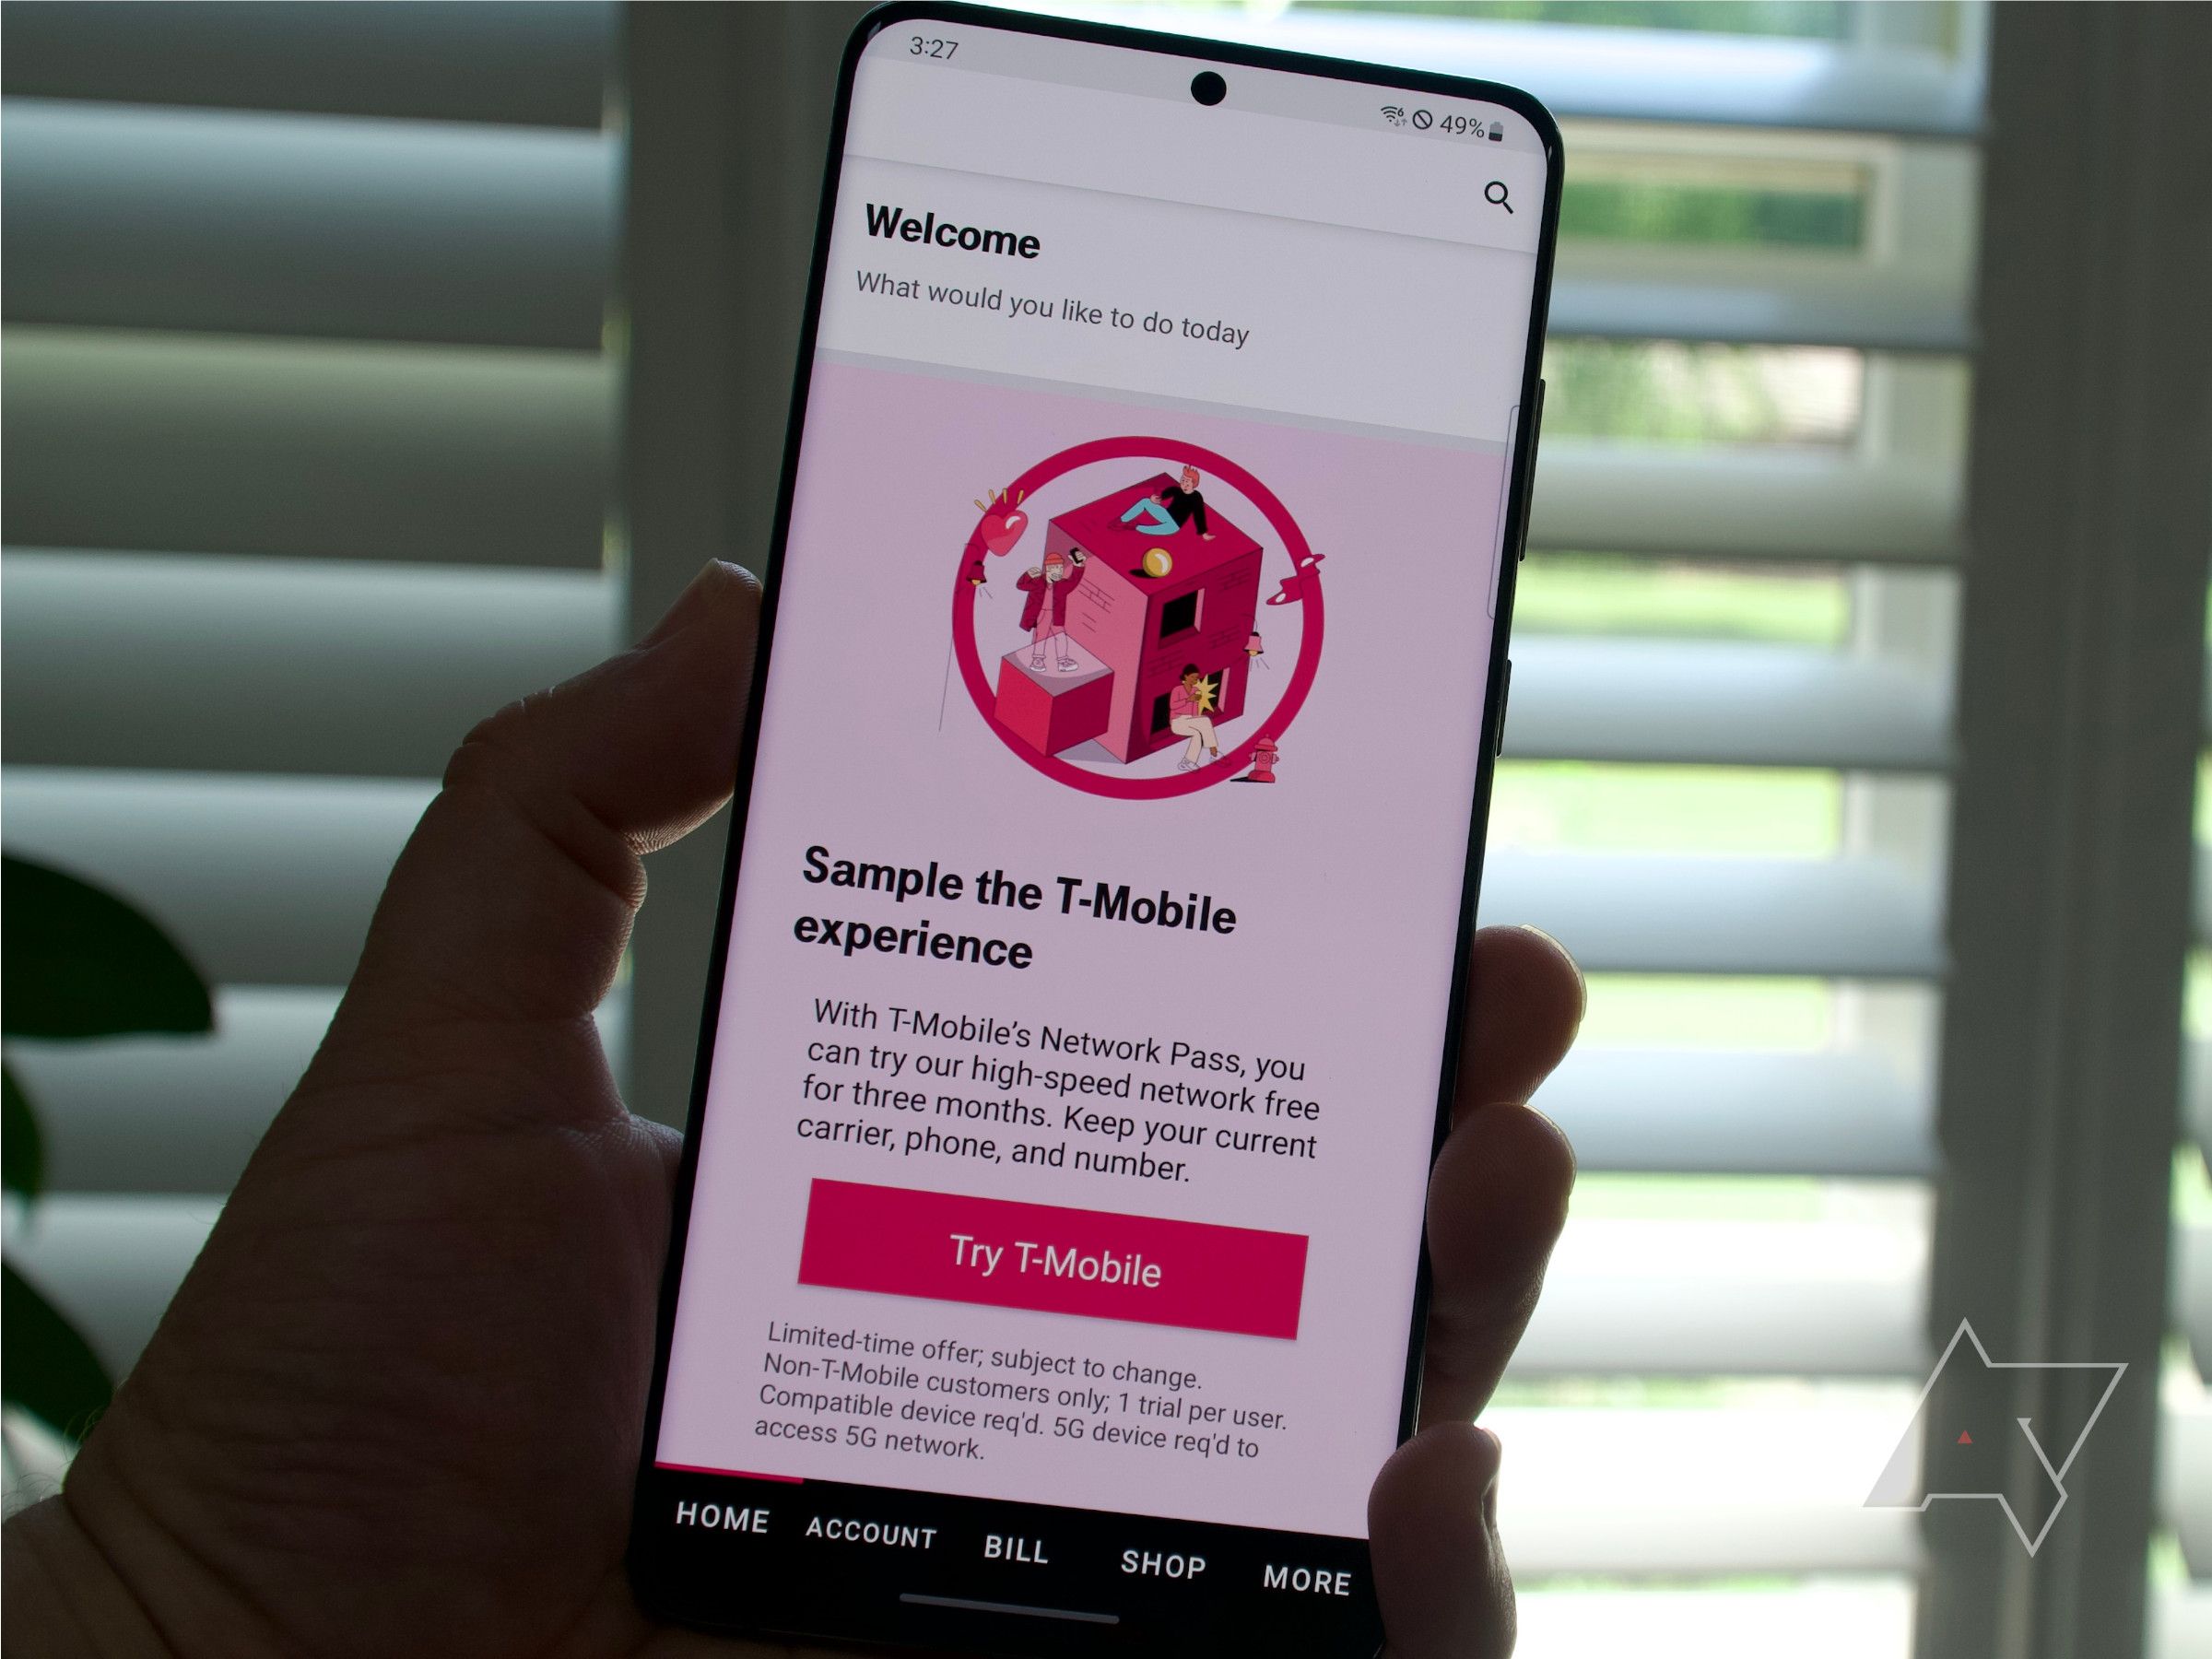 Try T-Mobile's network for three months with Network Pass